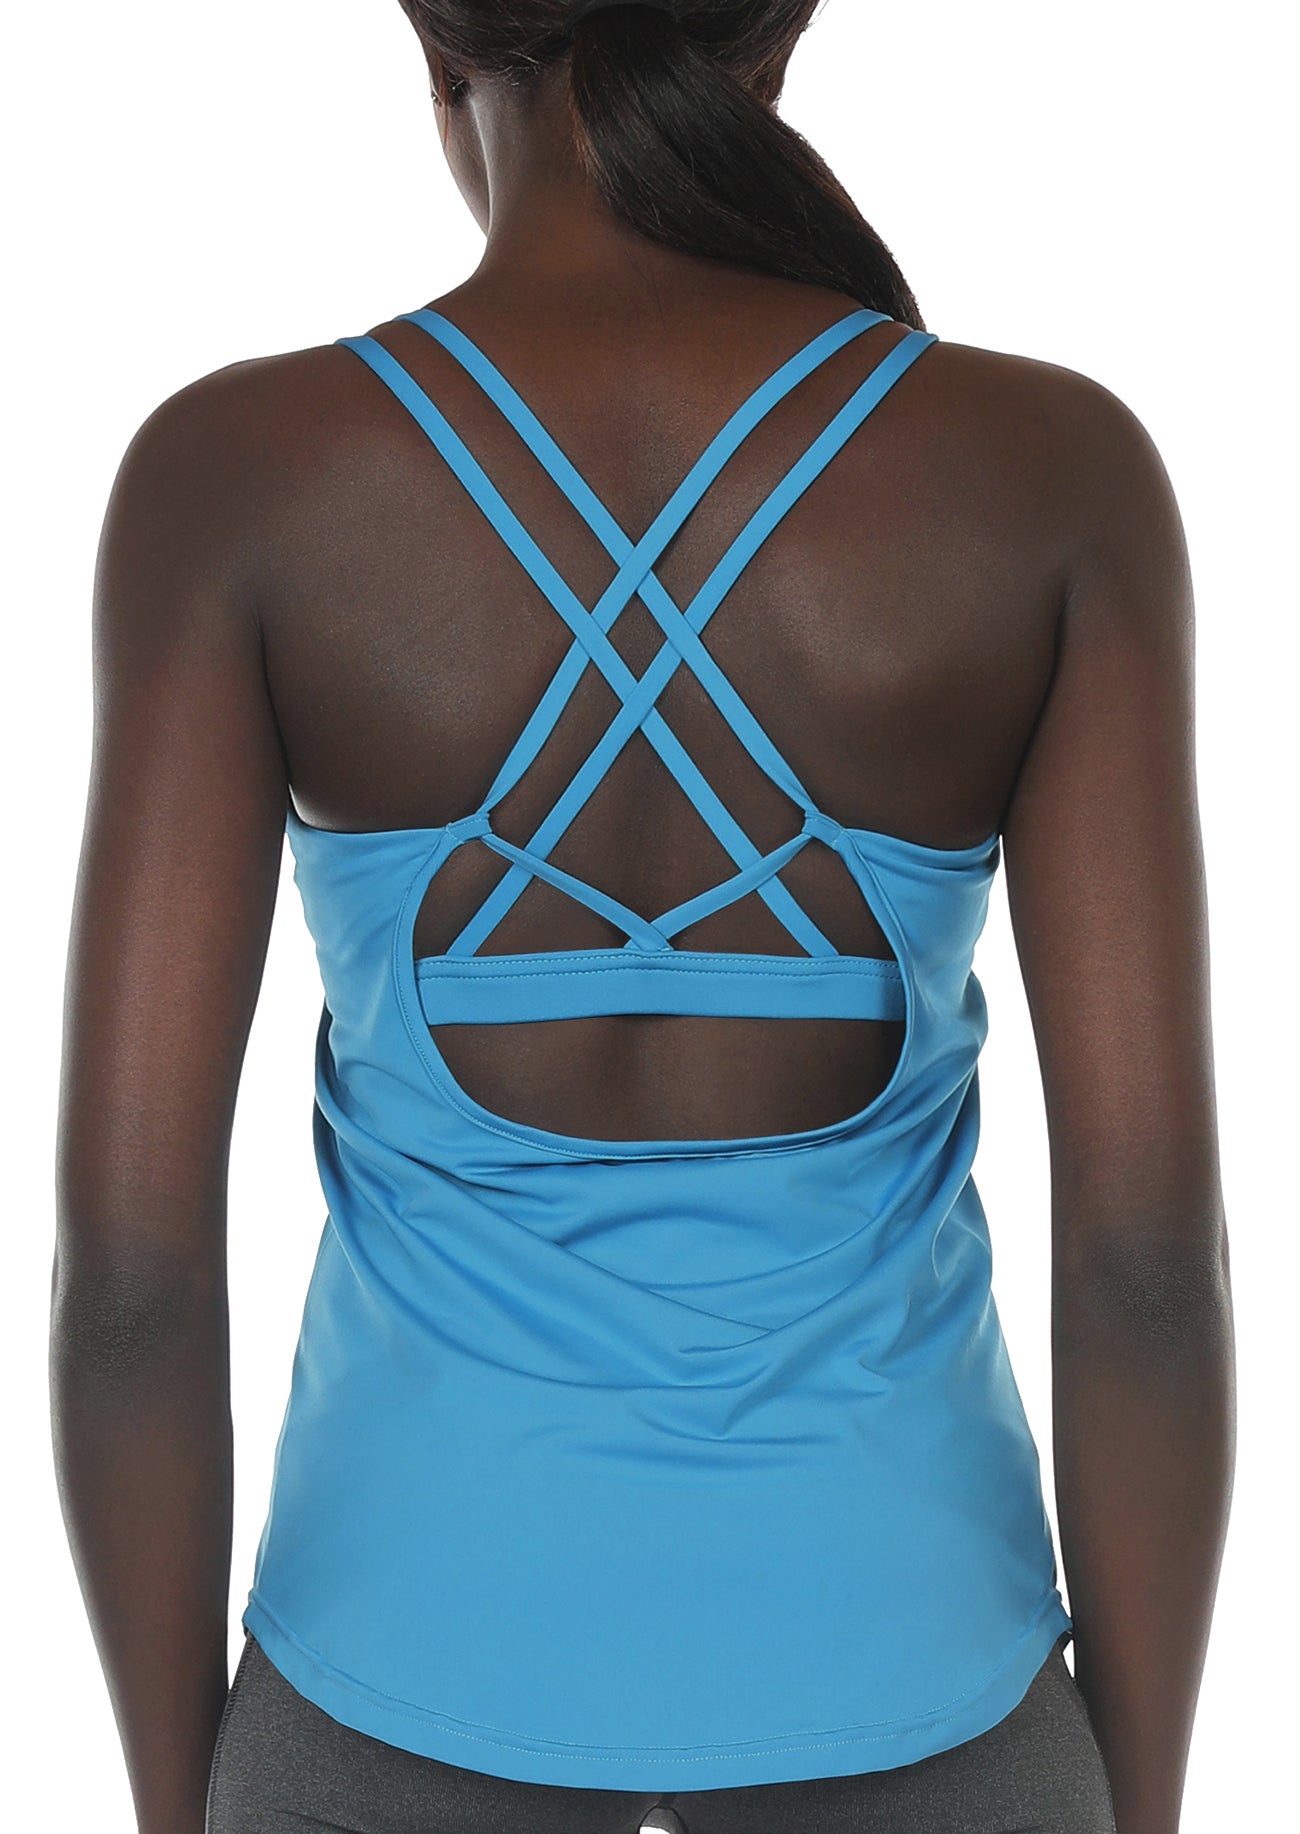 Spandex Athletic Tank Tops for Women